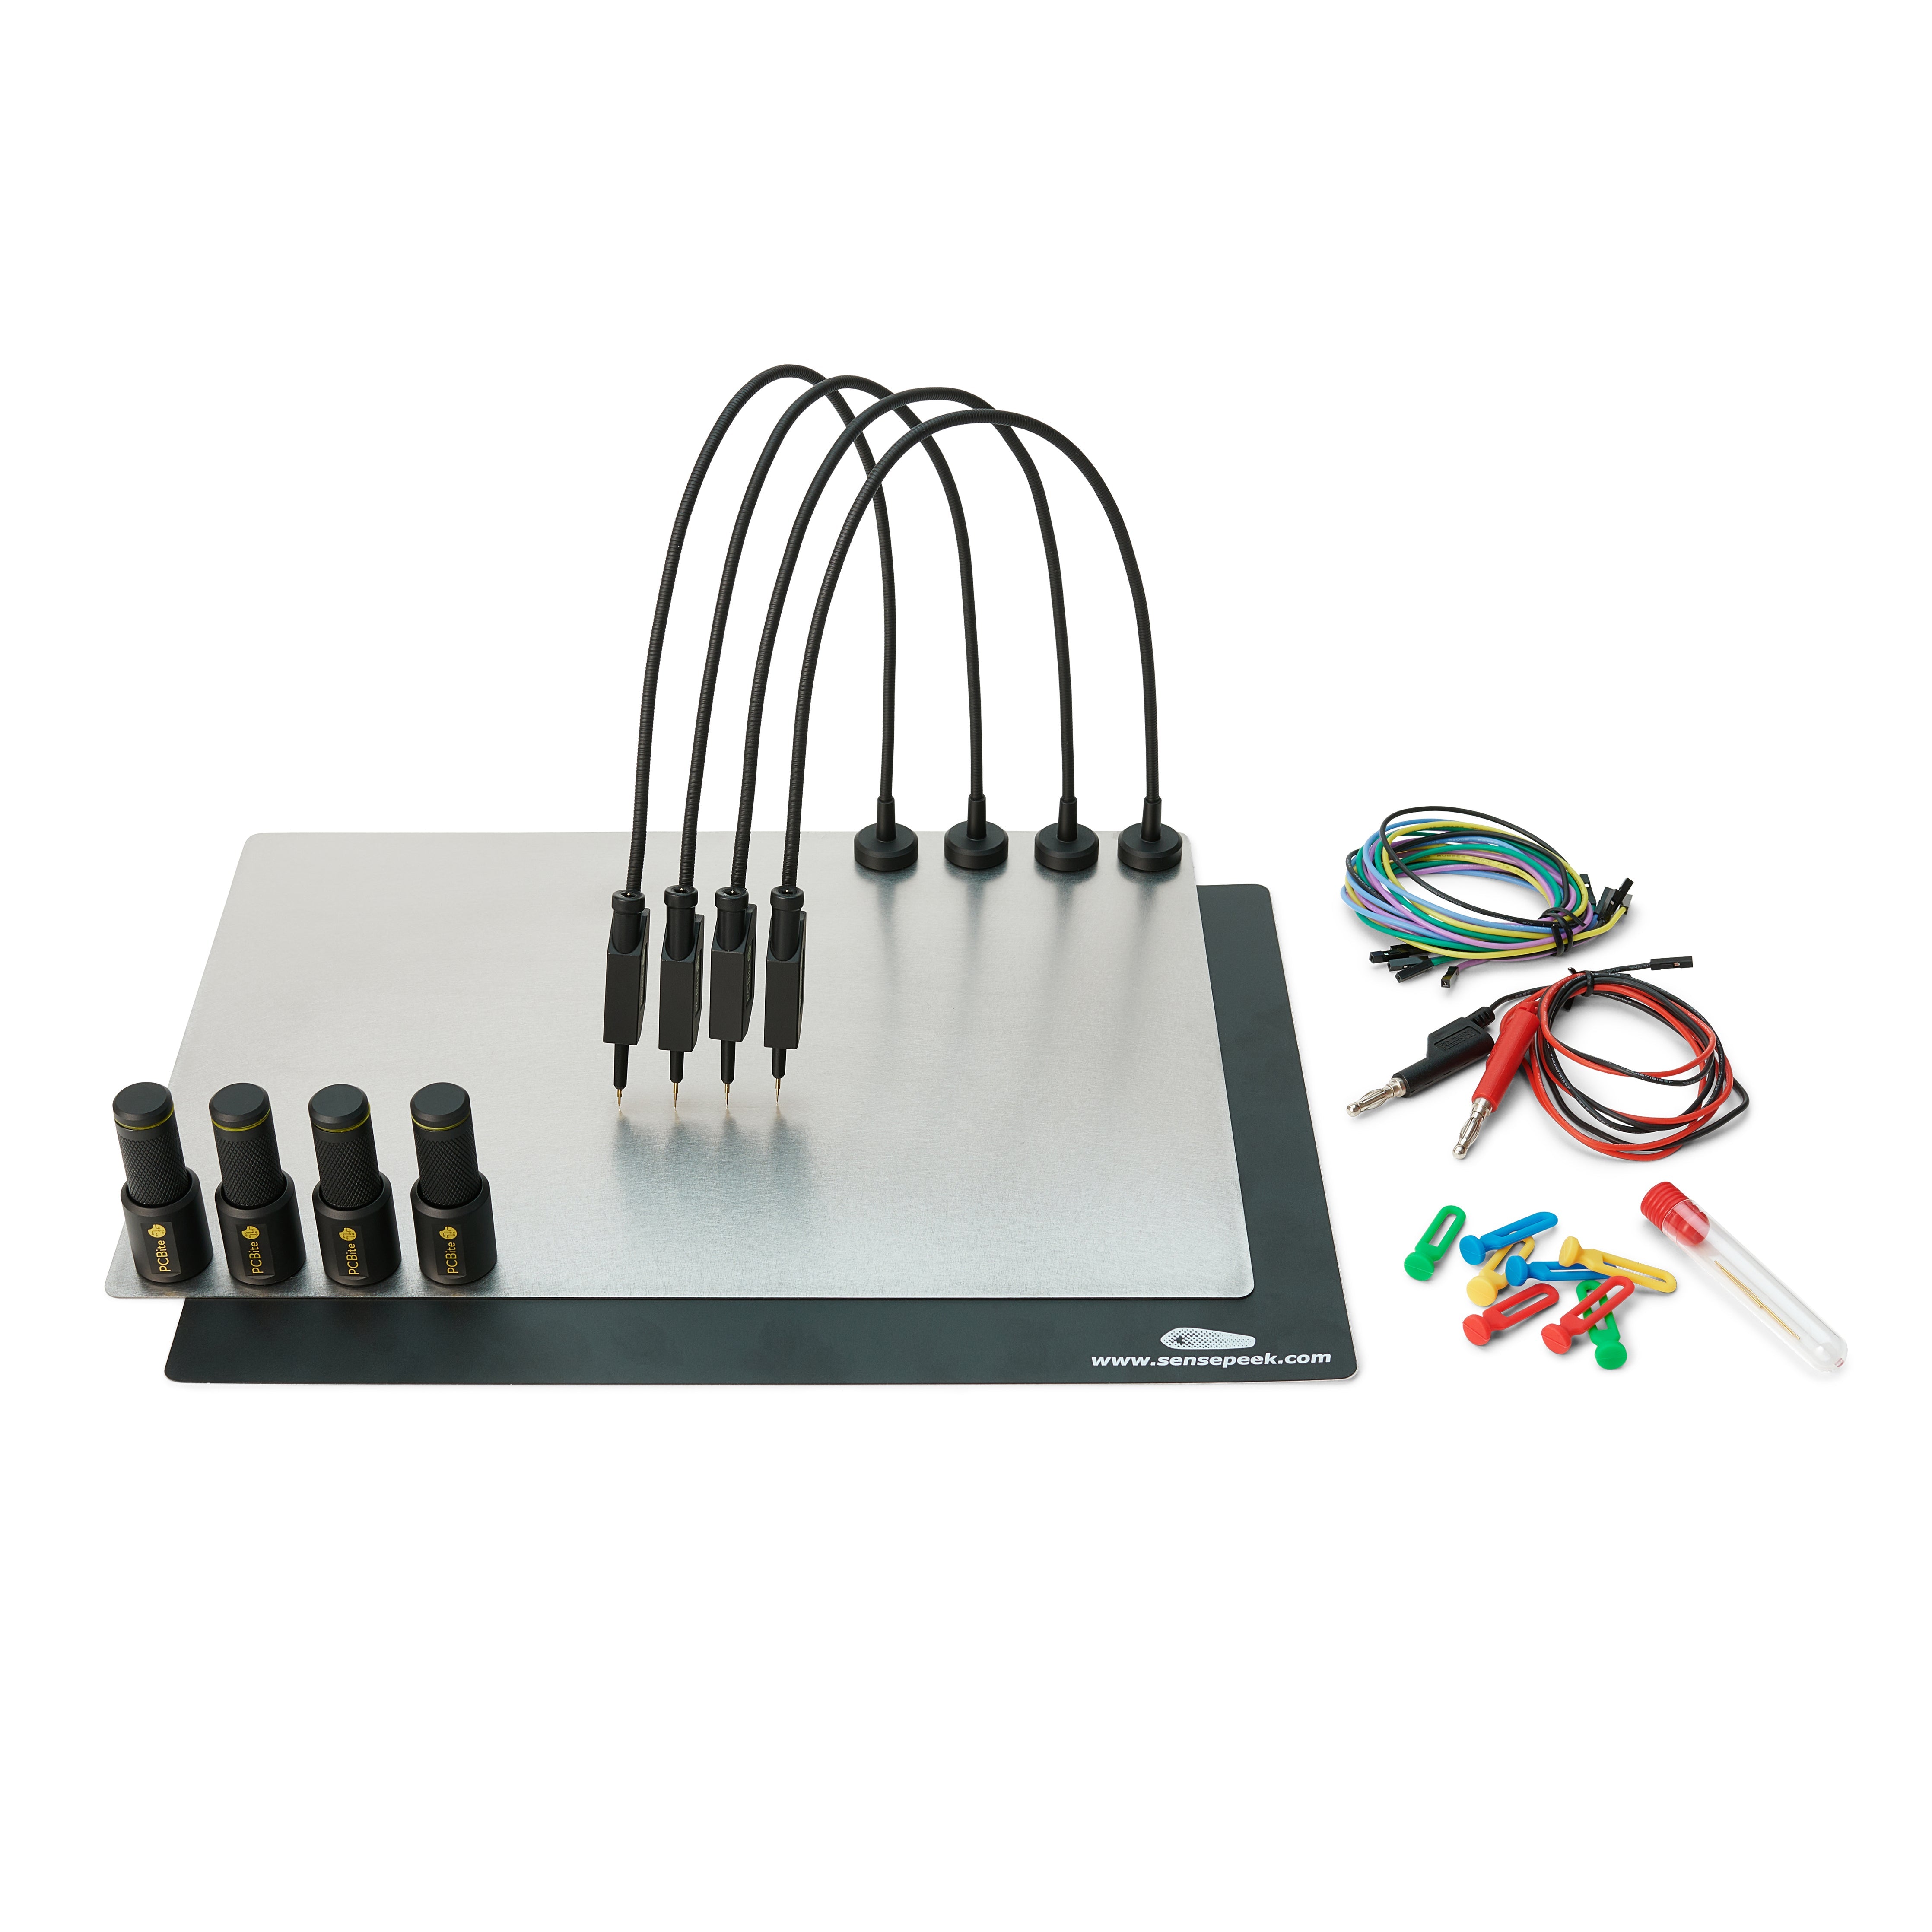 PCBite Kit with 4x SQ10 probes and test wires